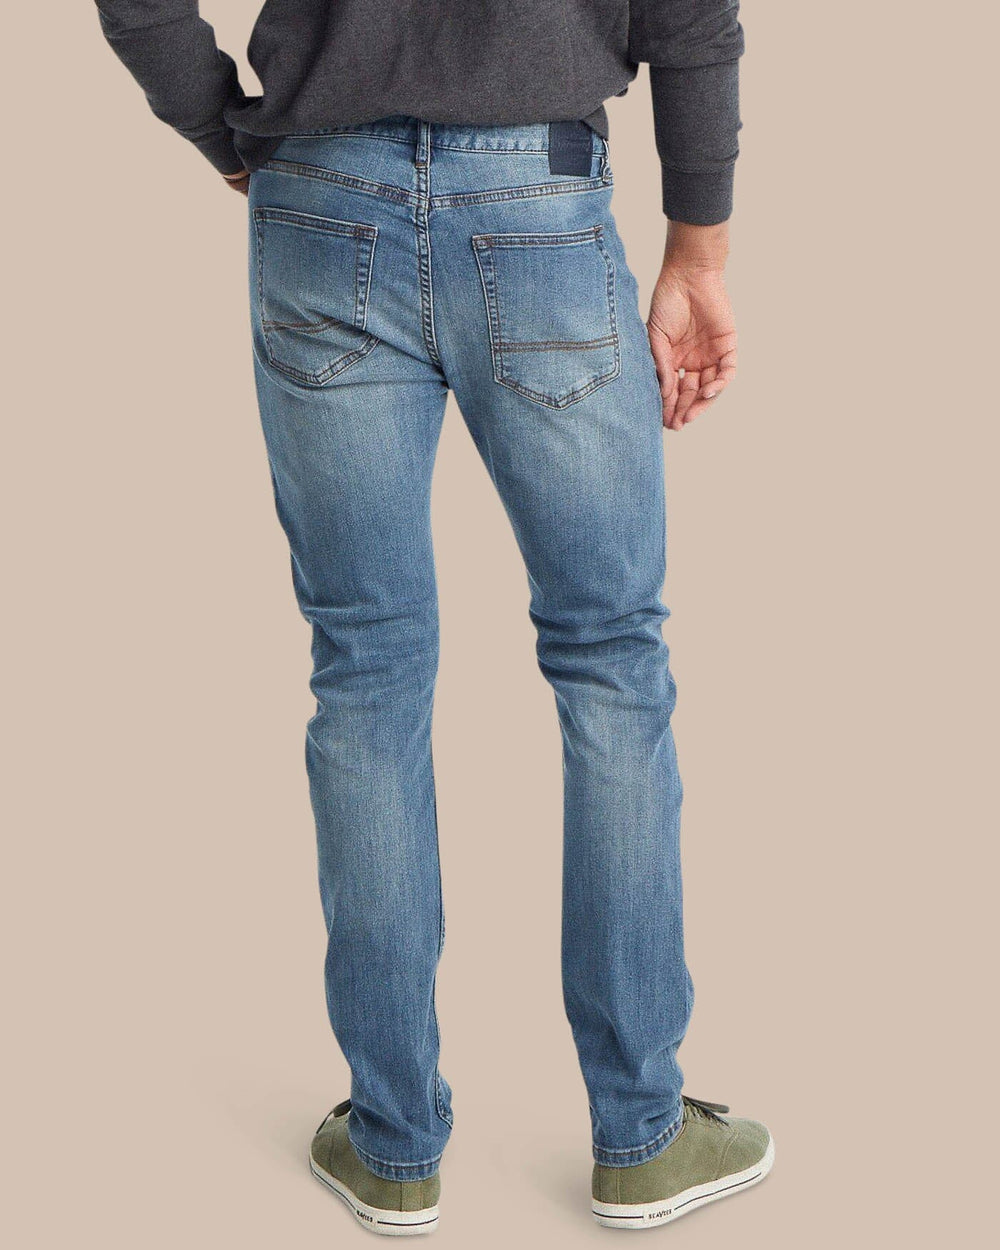 The back view of the Men's Blue Denim Charleston Denim Jeans by Southern Tide - Medium Wash